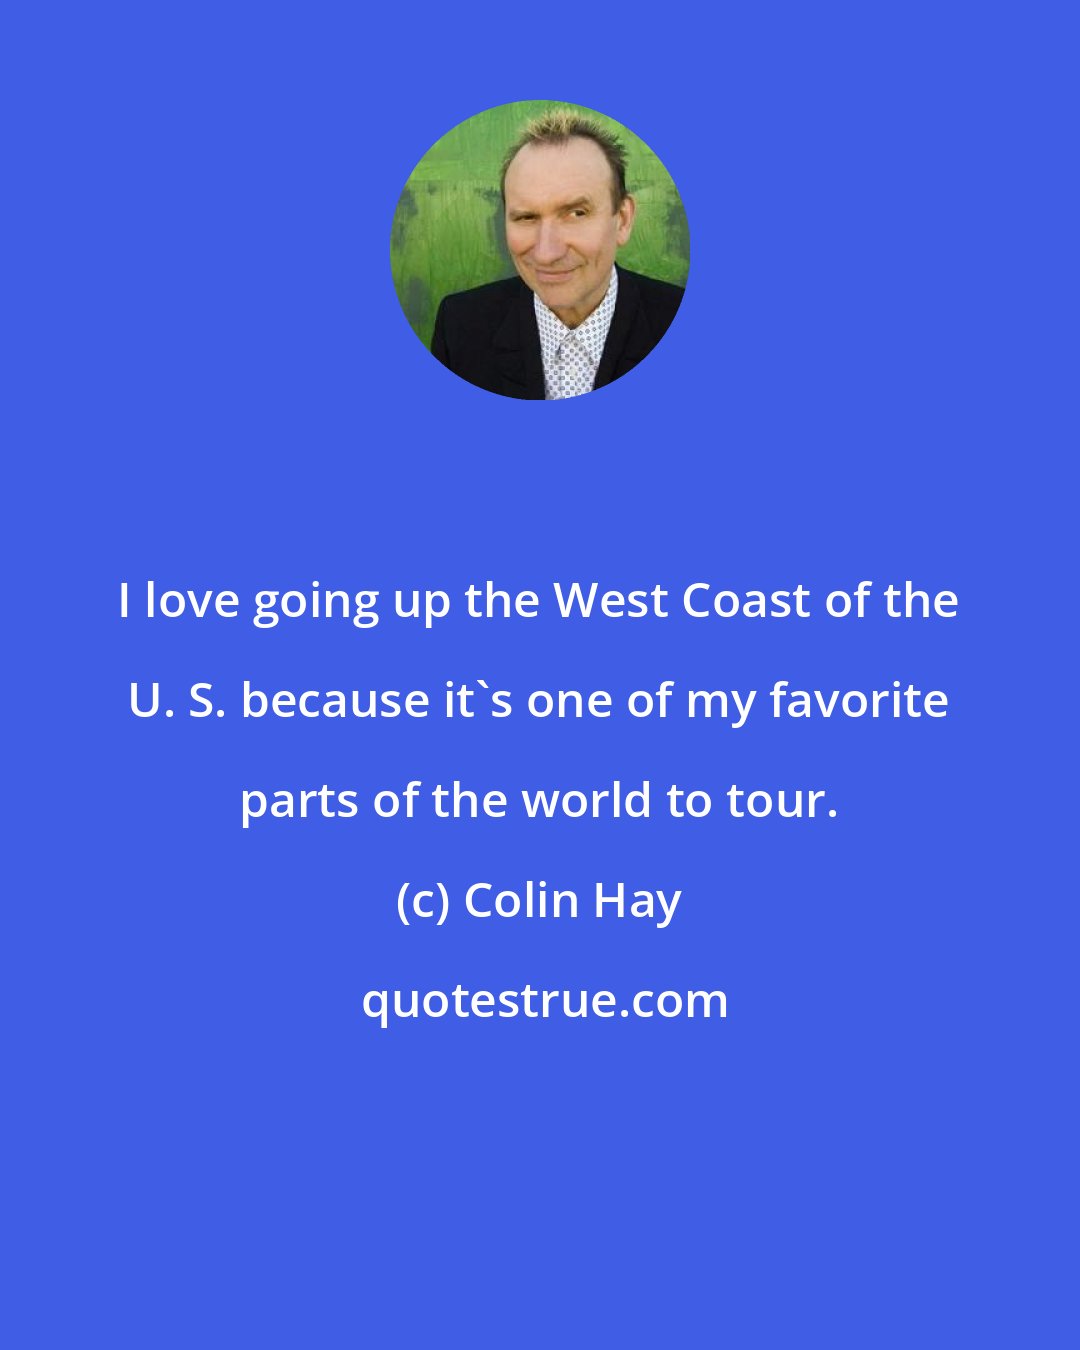 Colin Hay: I love going up the West Coast of the U. S. because it's one of my favorite parts of the world to tour.